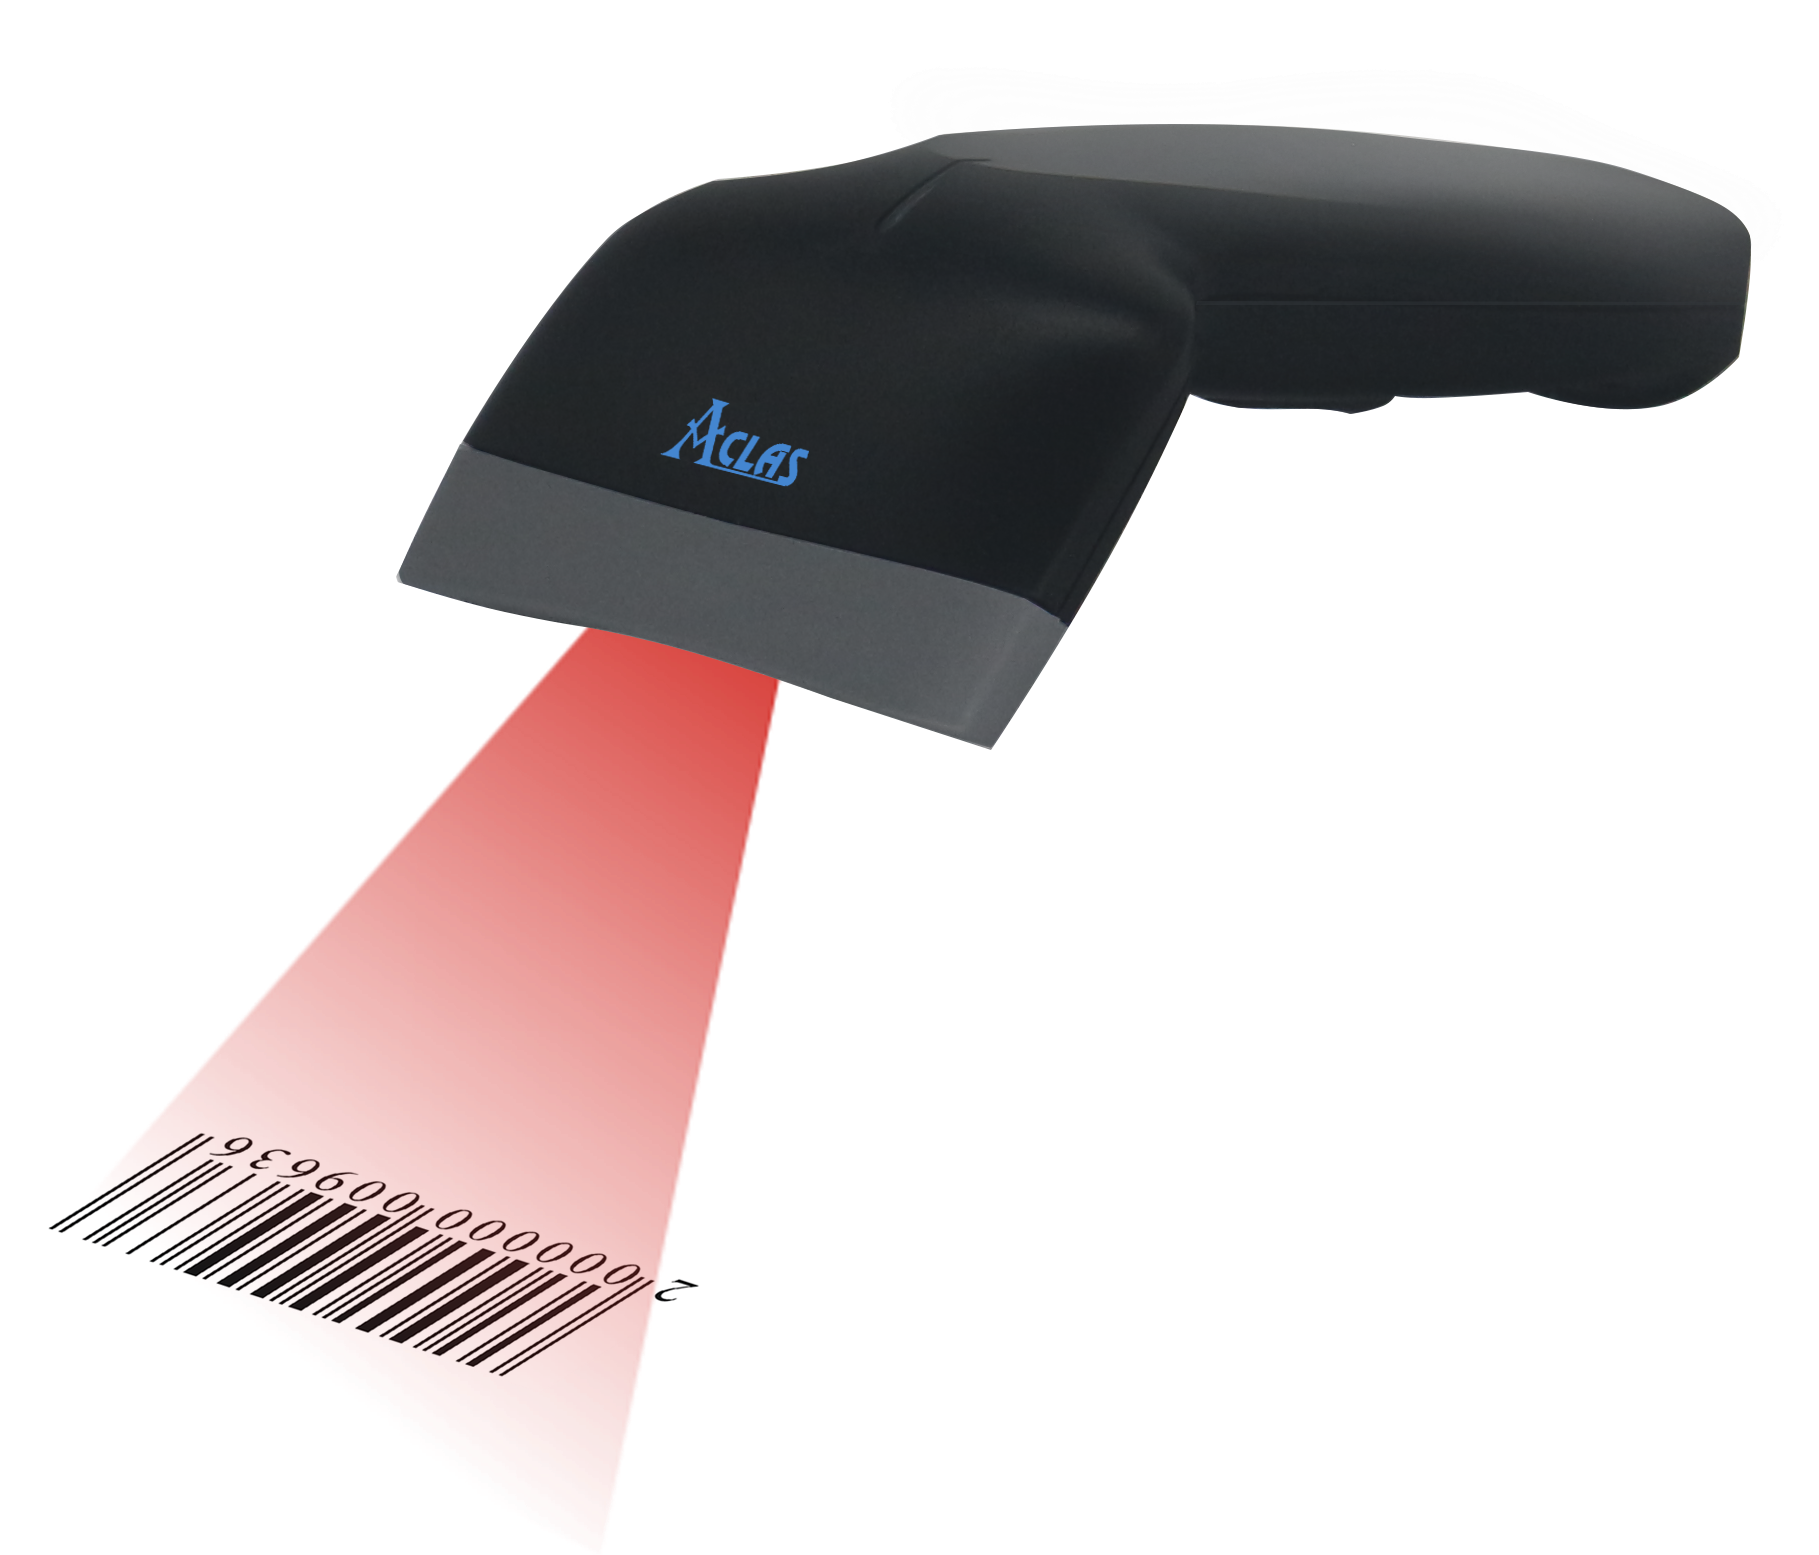 Scanner Equipment PNG HD Image